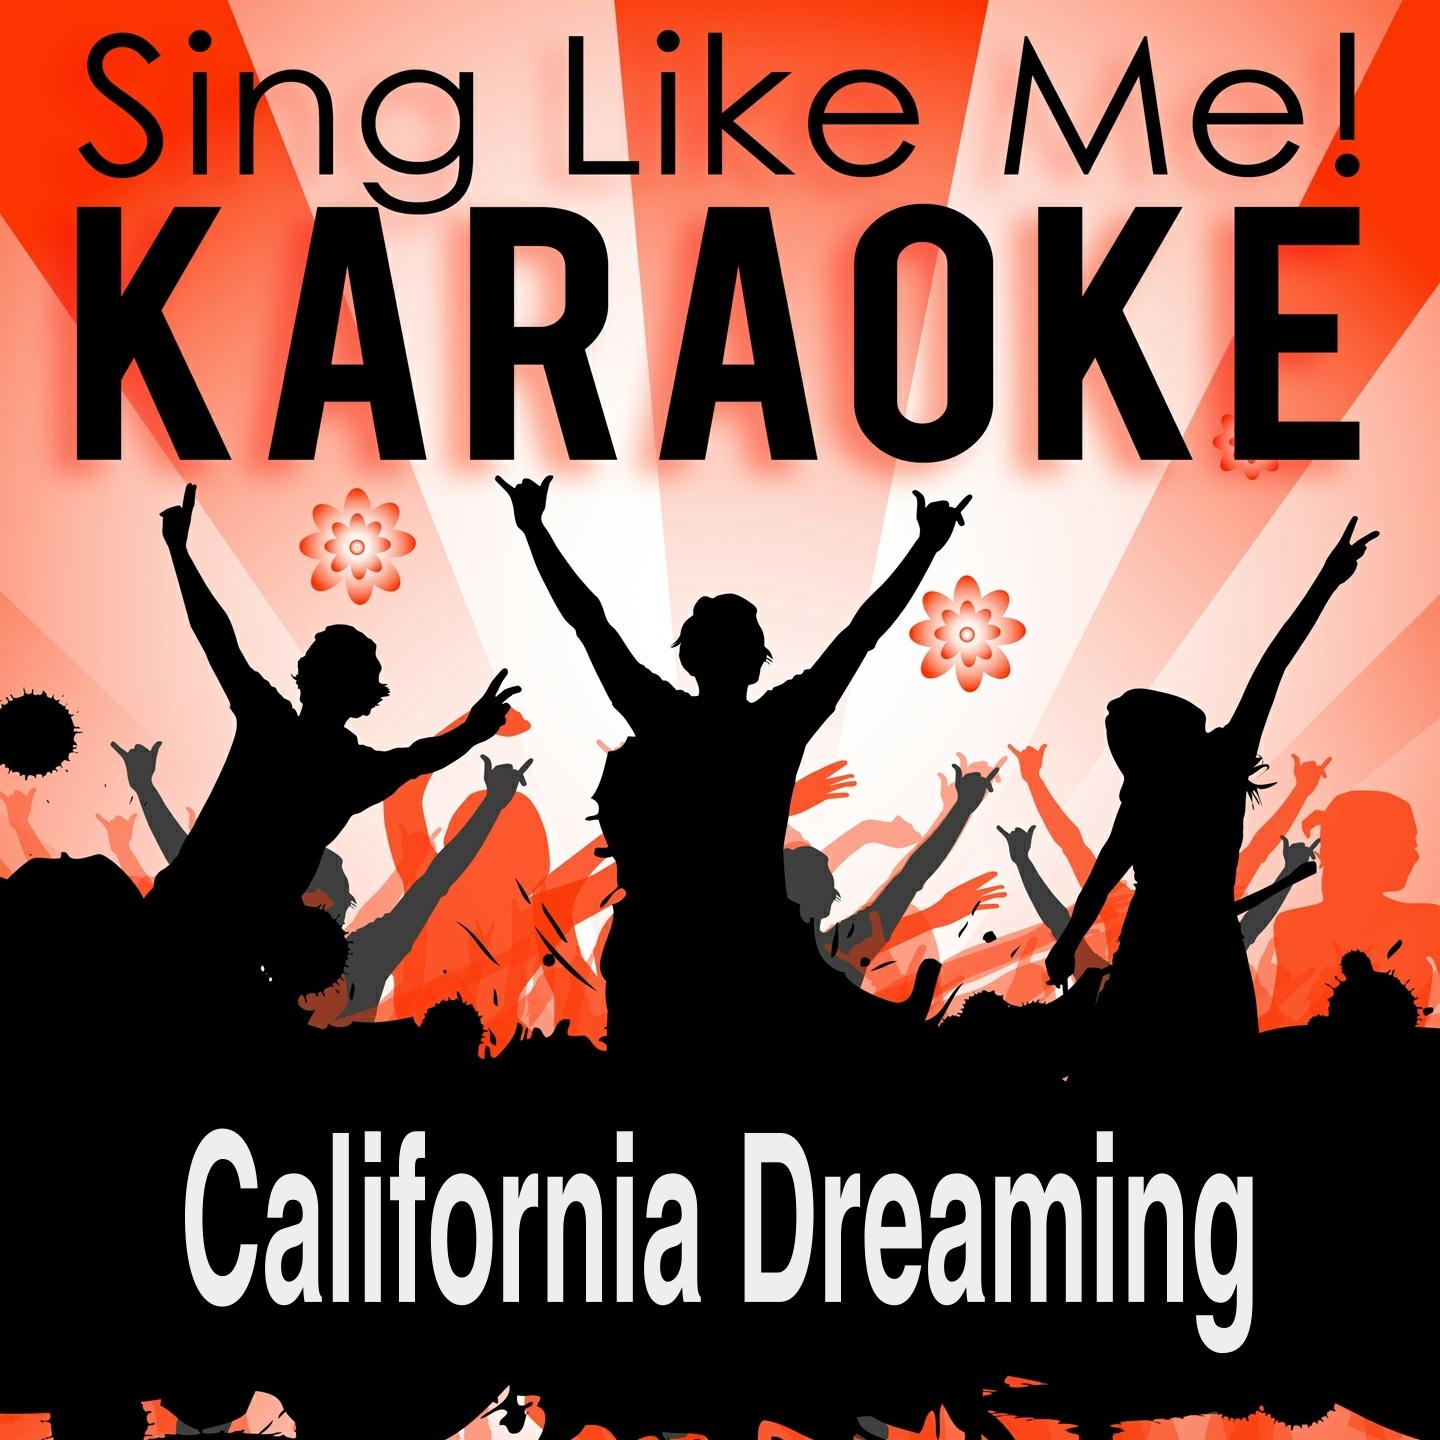 California Dreaming (Karaoke Version with Guide Melody) (Originally Performed By Beach Boys)